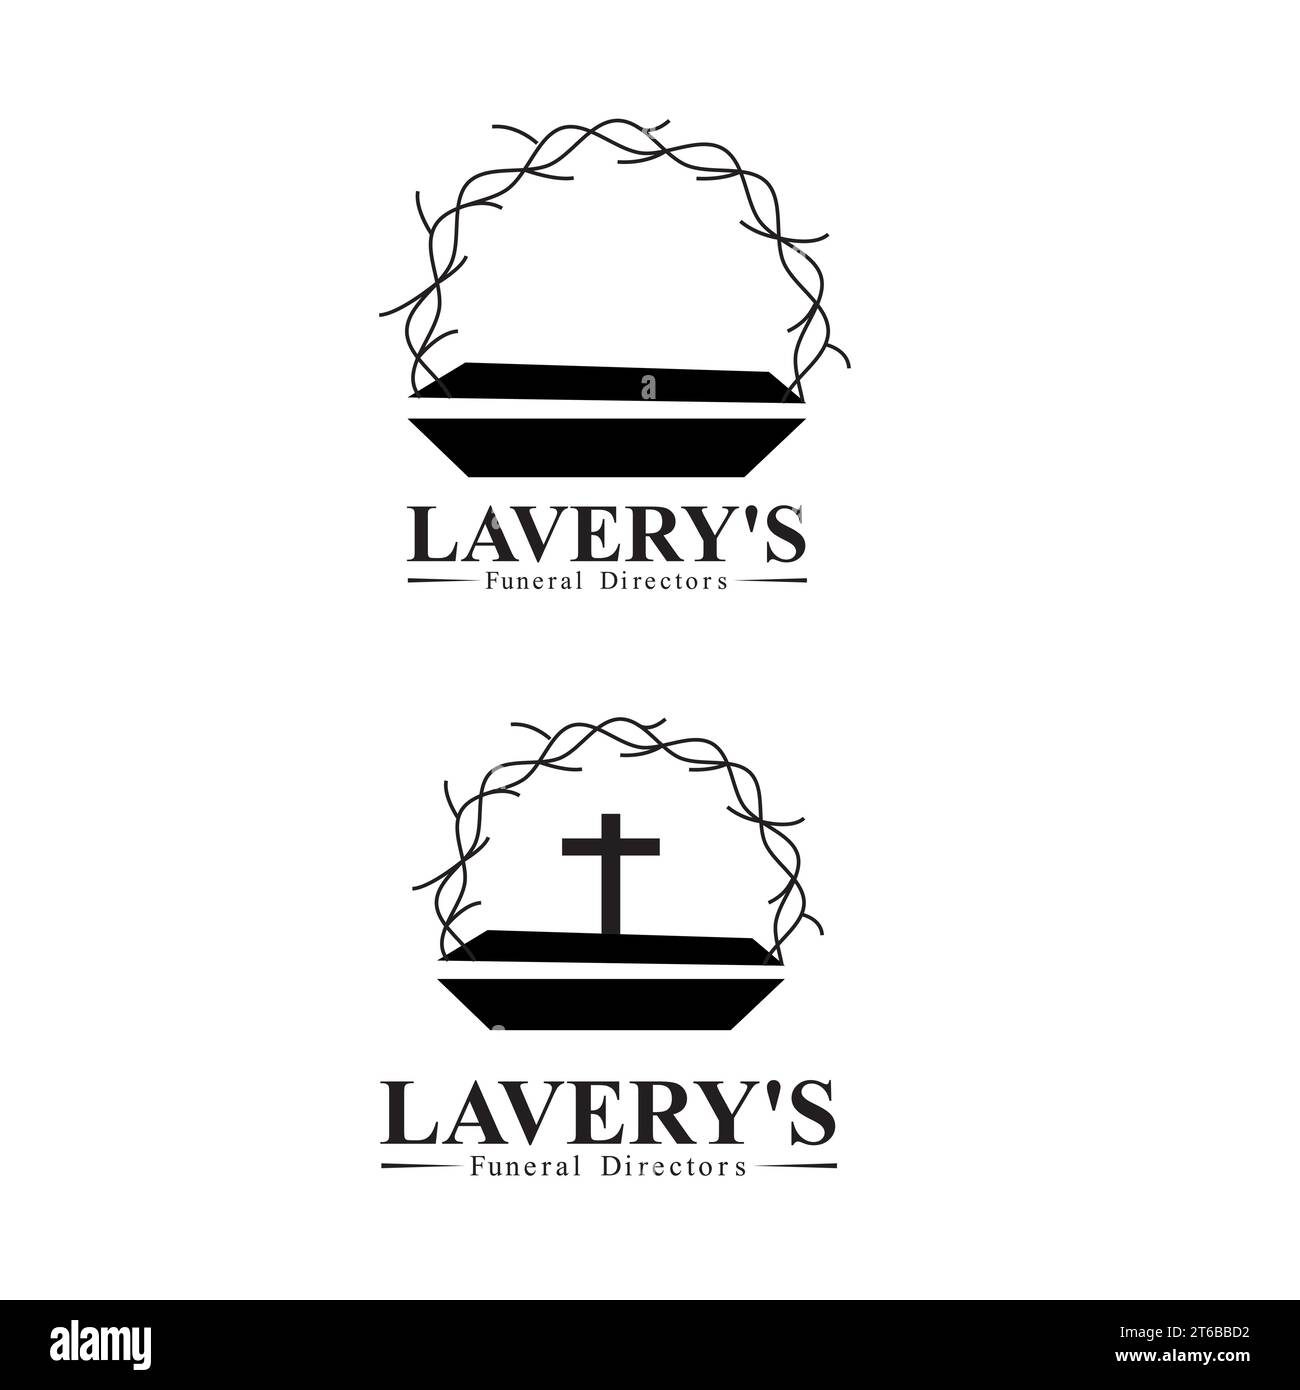 Funeral Directors Logo Design with illustration and Logo Elements Stock Vector